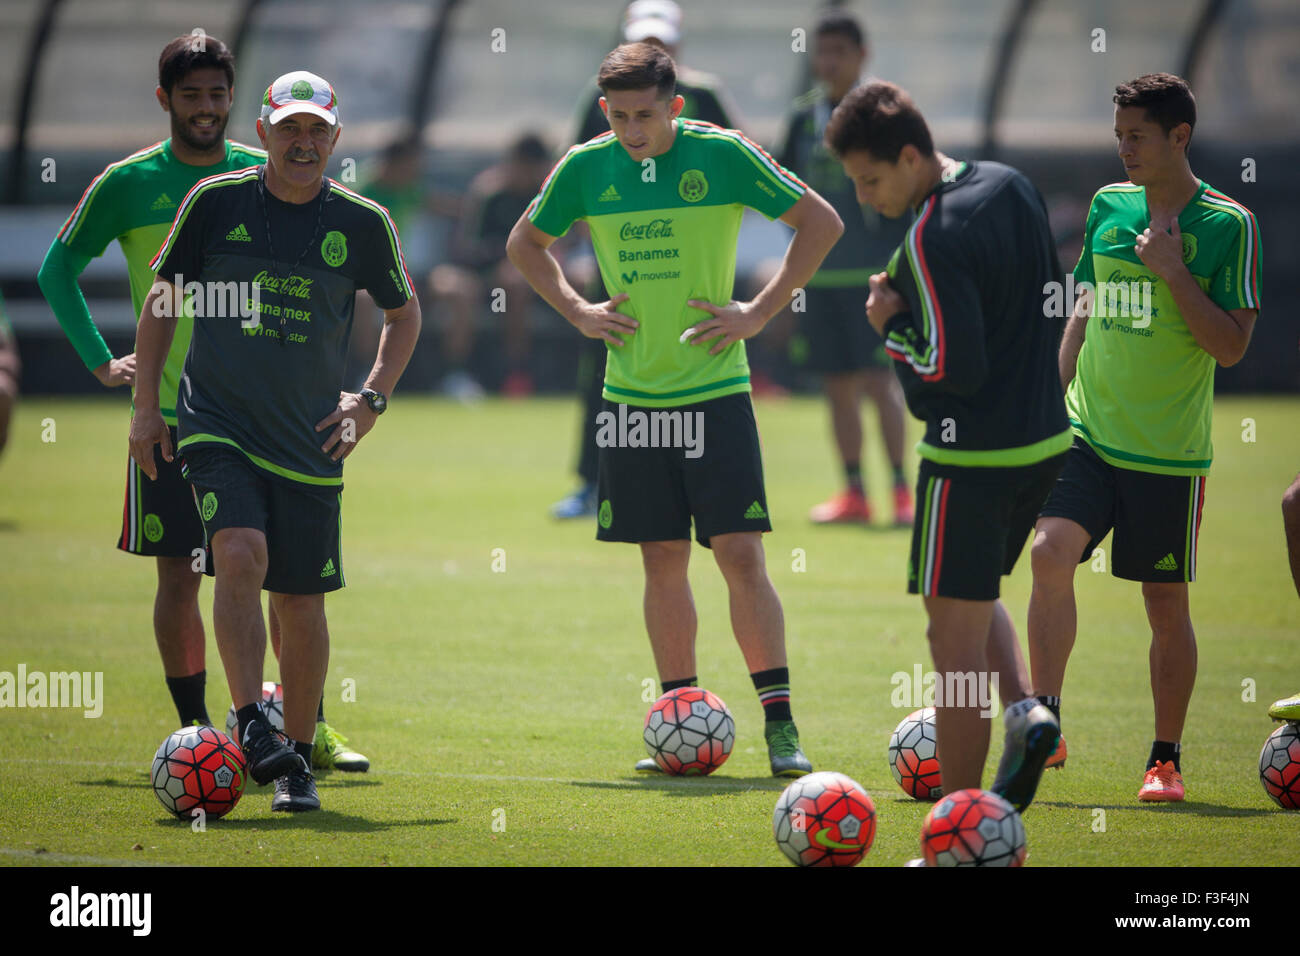 (151007) -- MEXICO CITY, Oct. 7, 2015 (Xinhua) -- Mexico's national soccer team coach Ricardo Ferretti (L-Front), and players Carlos Vela (L-Back), Hector Herrera (C) and Carlos Esquivel (R), take part in a training session at High Performance Center of the Mexican Football Federation (CAR-FEMEXFUT, for its acronym in Spanish), in Mexico City, capital of Mexico, Oct. 6, 2015. Mexican national soccer team held a training session on Tuesday ahead its match against the United States national soccer team for a spot in the Confederations Cup Russia 2017, to be played on Oct. 10 at Rose Bowl stadium Stock Photo